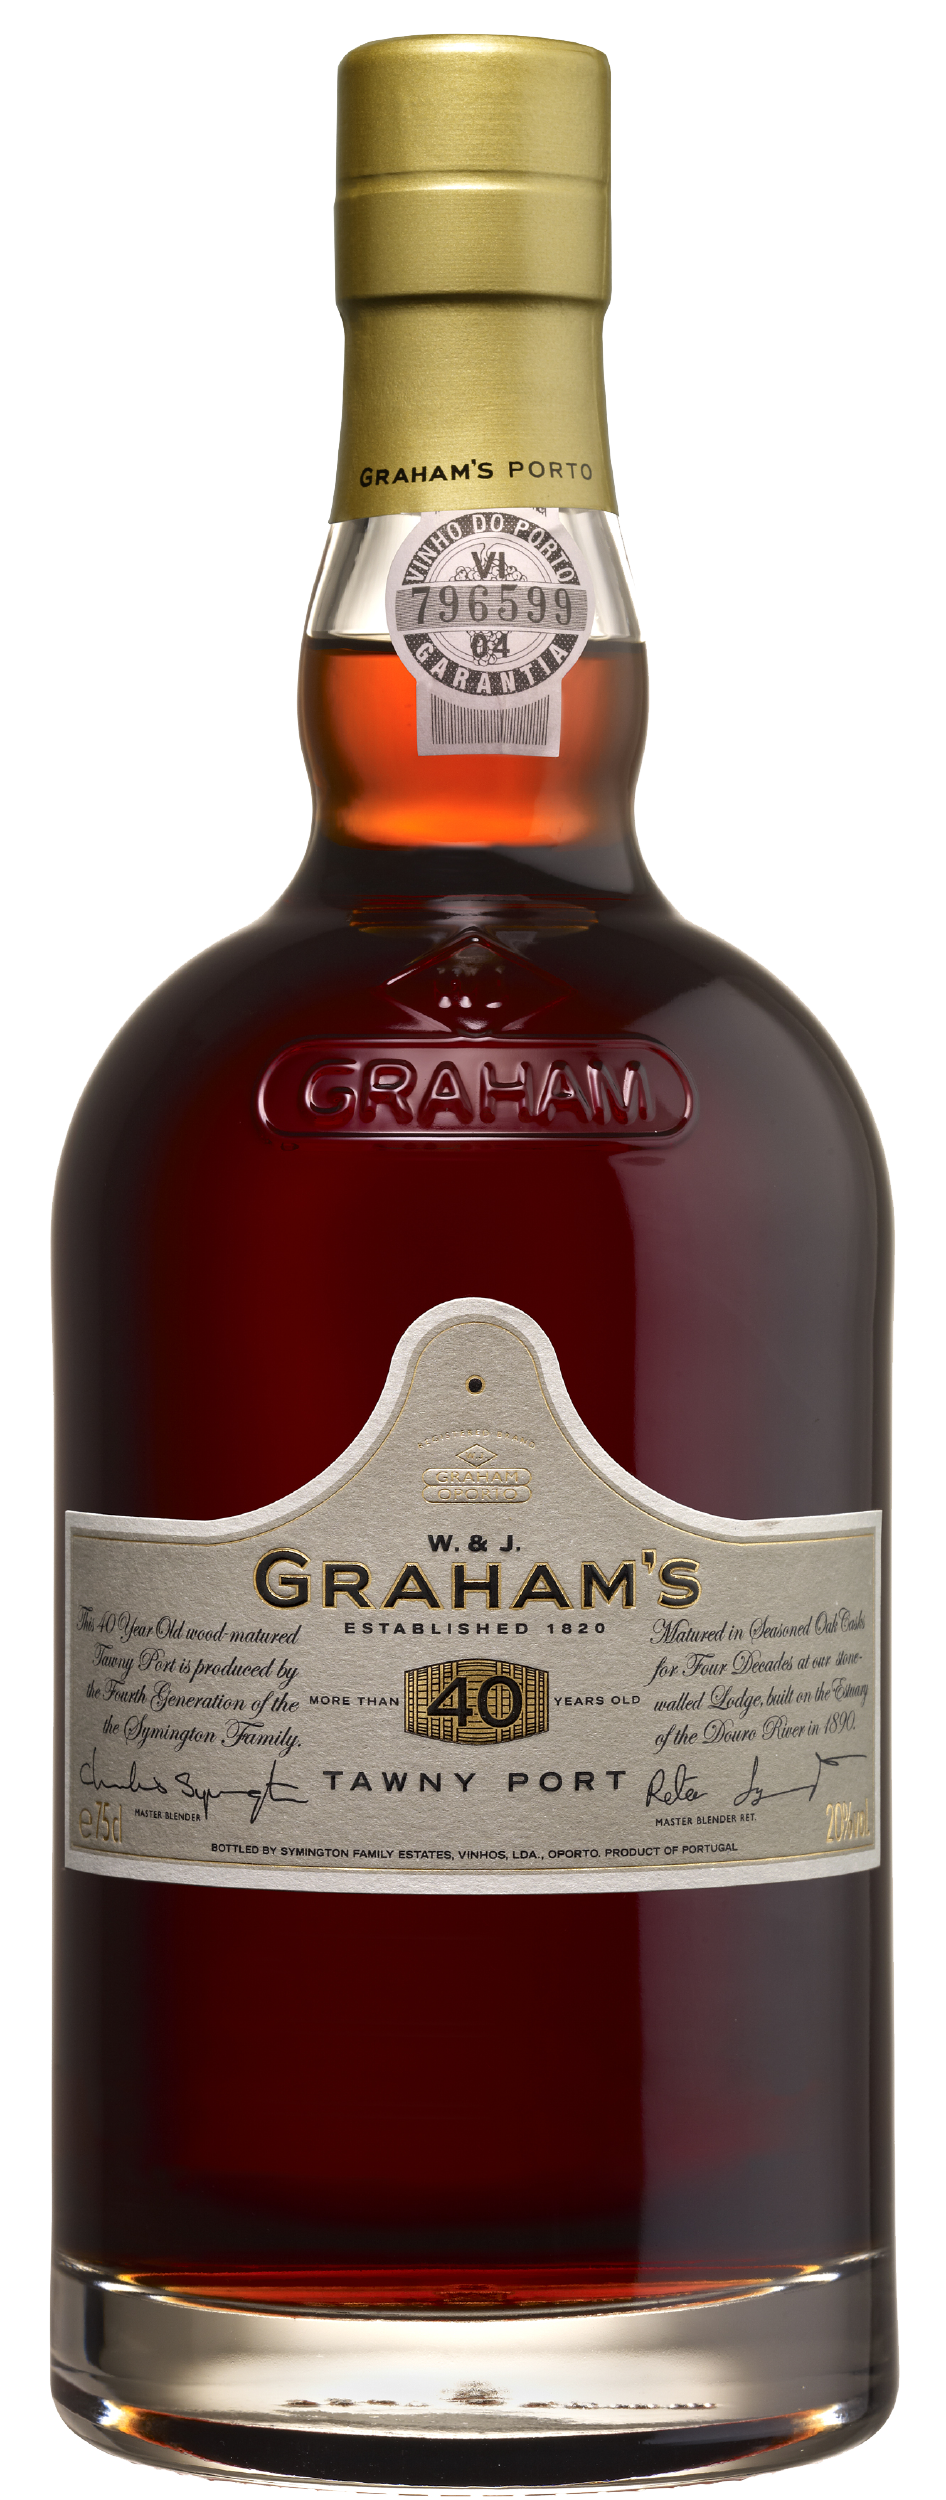 Product Image for GRAHAM'S 40 YEAR OLD TAWNY PORT